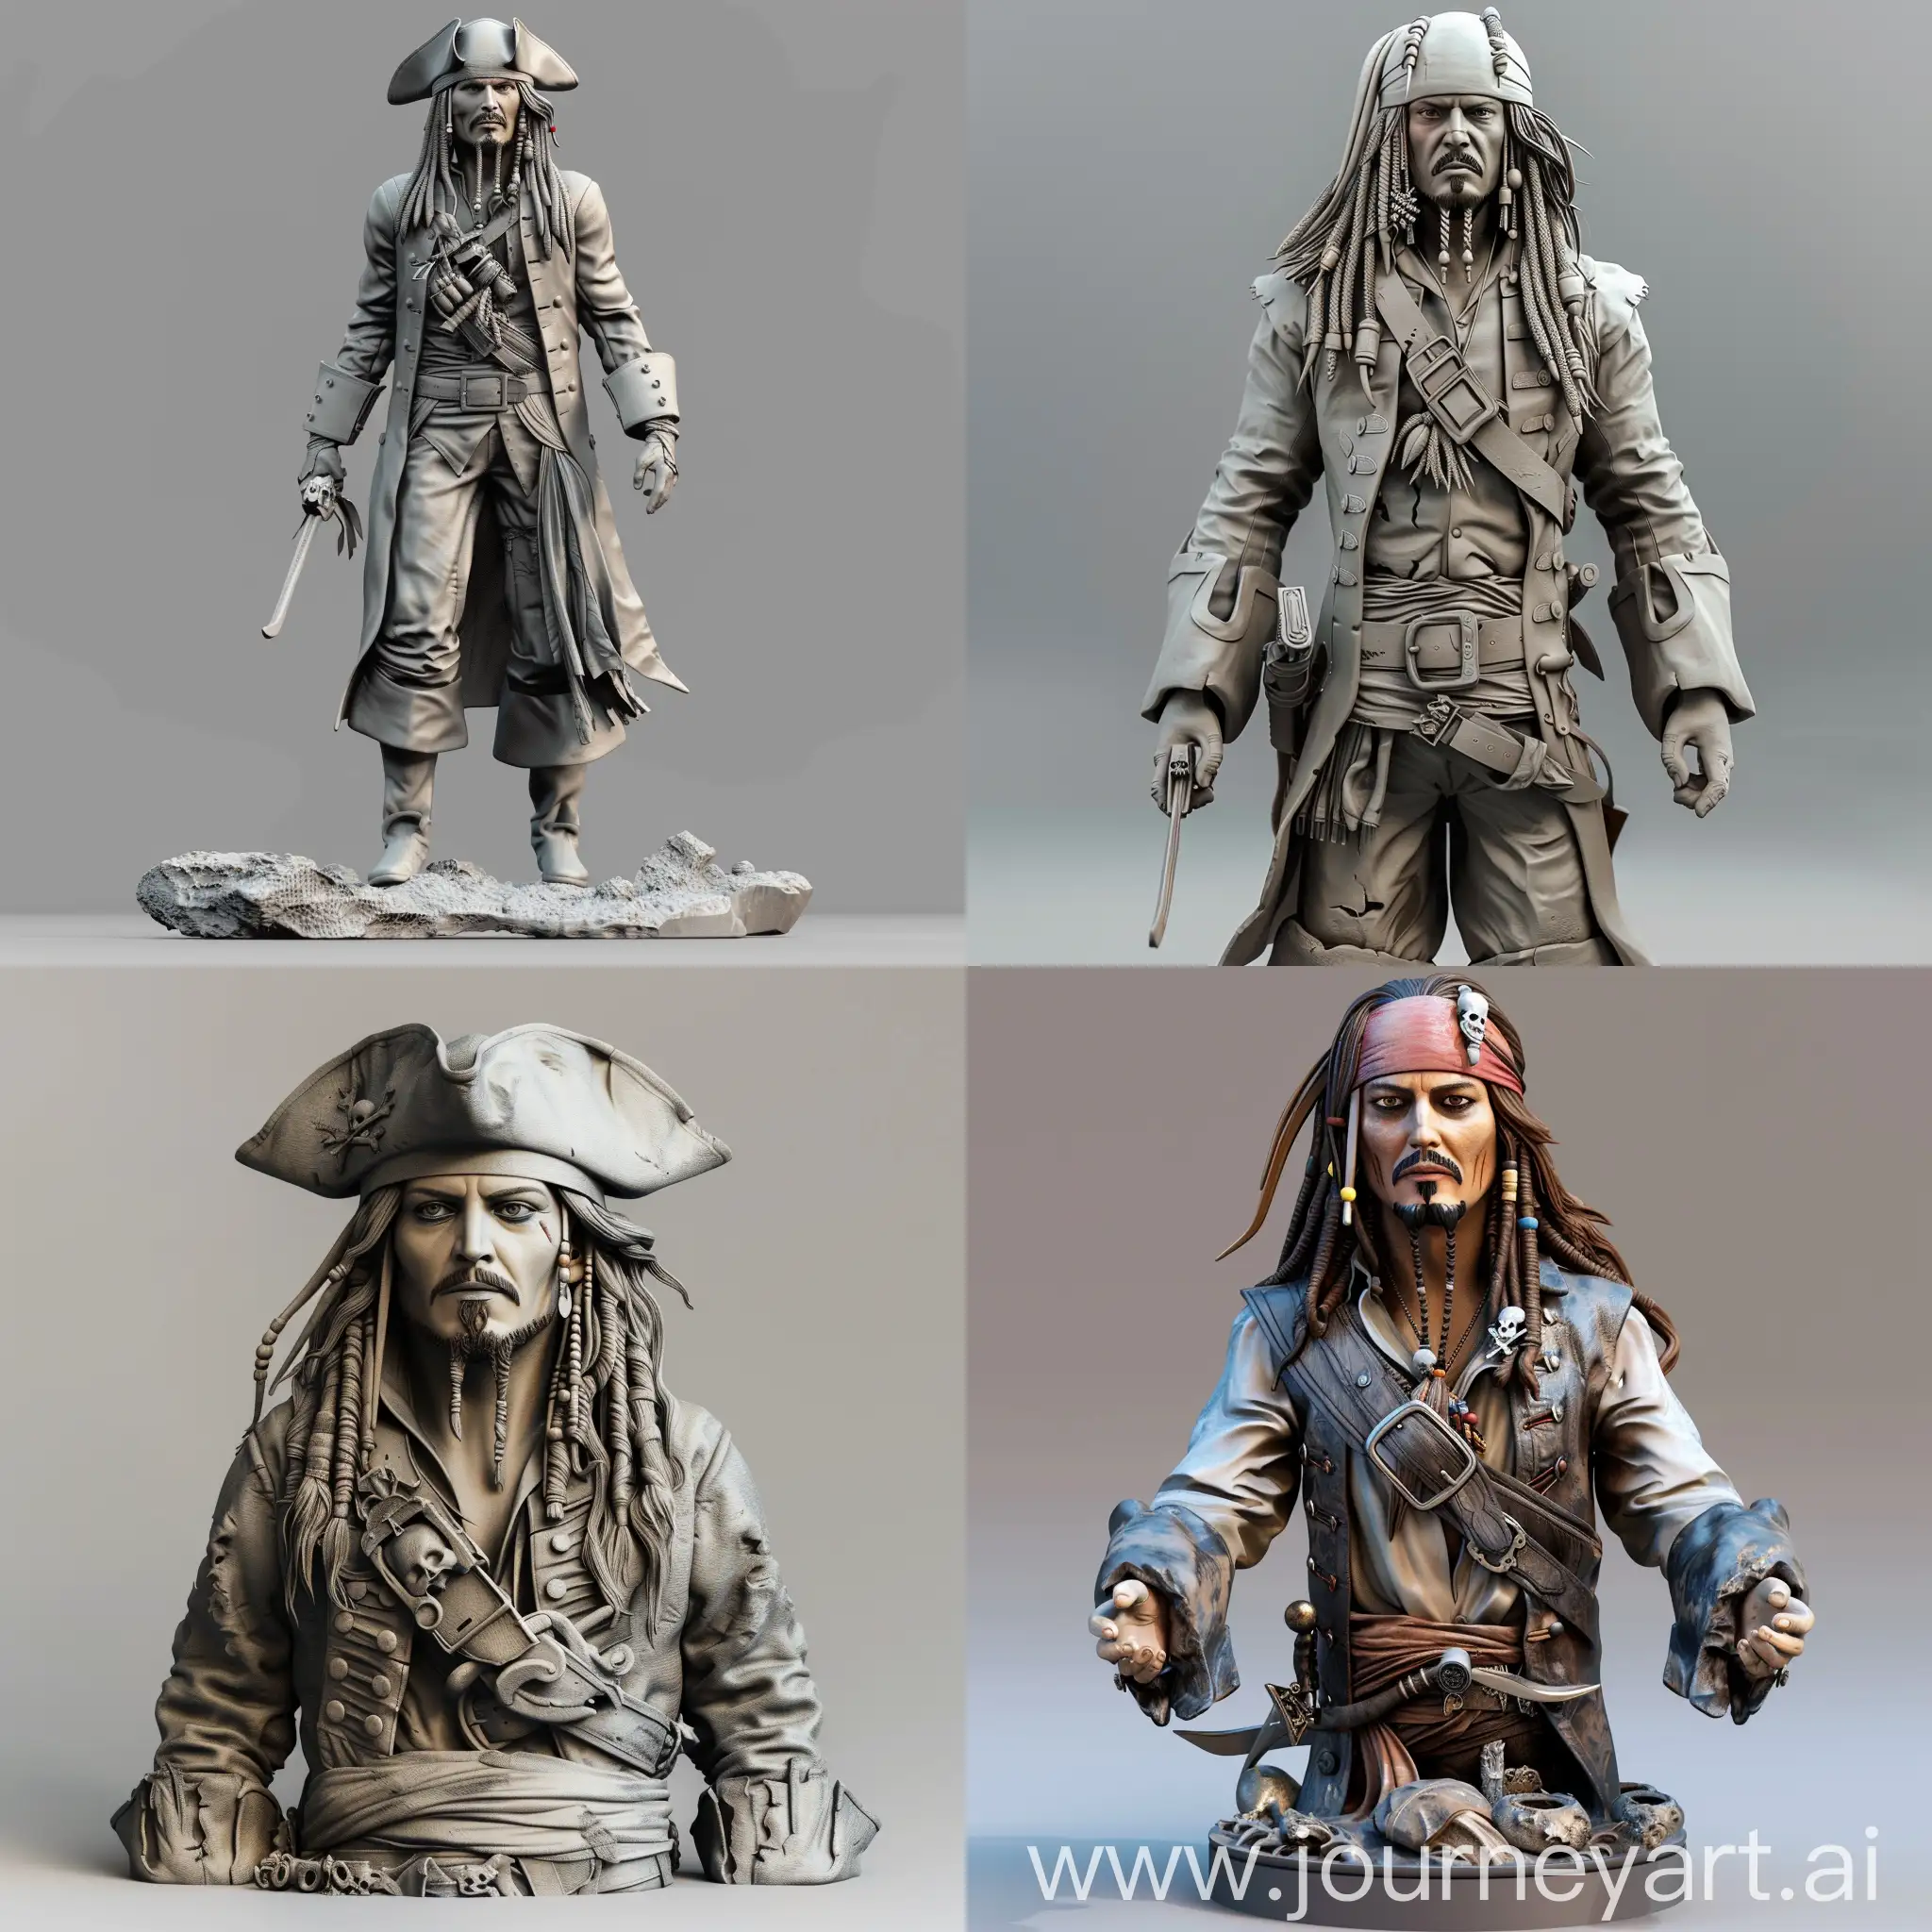 3D-Jack-Sparrow-Cosplay-Portrait-from-Pirates-of-the-Caribbean